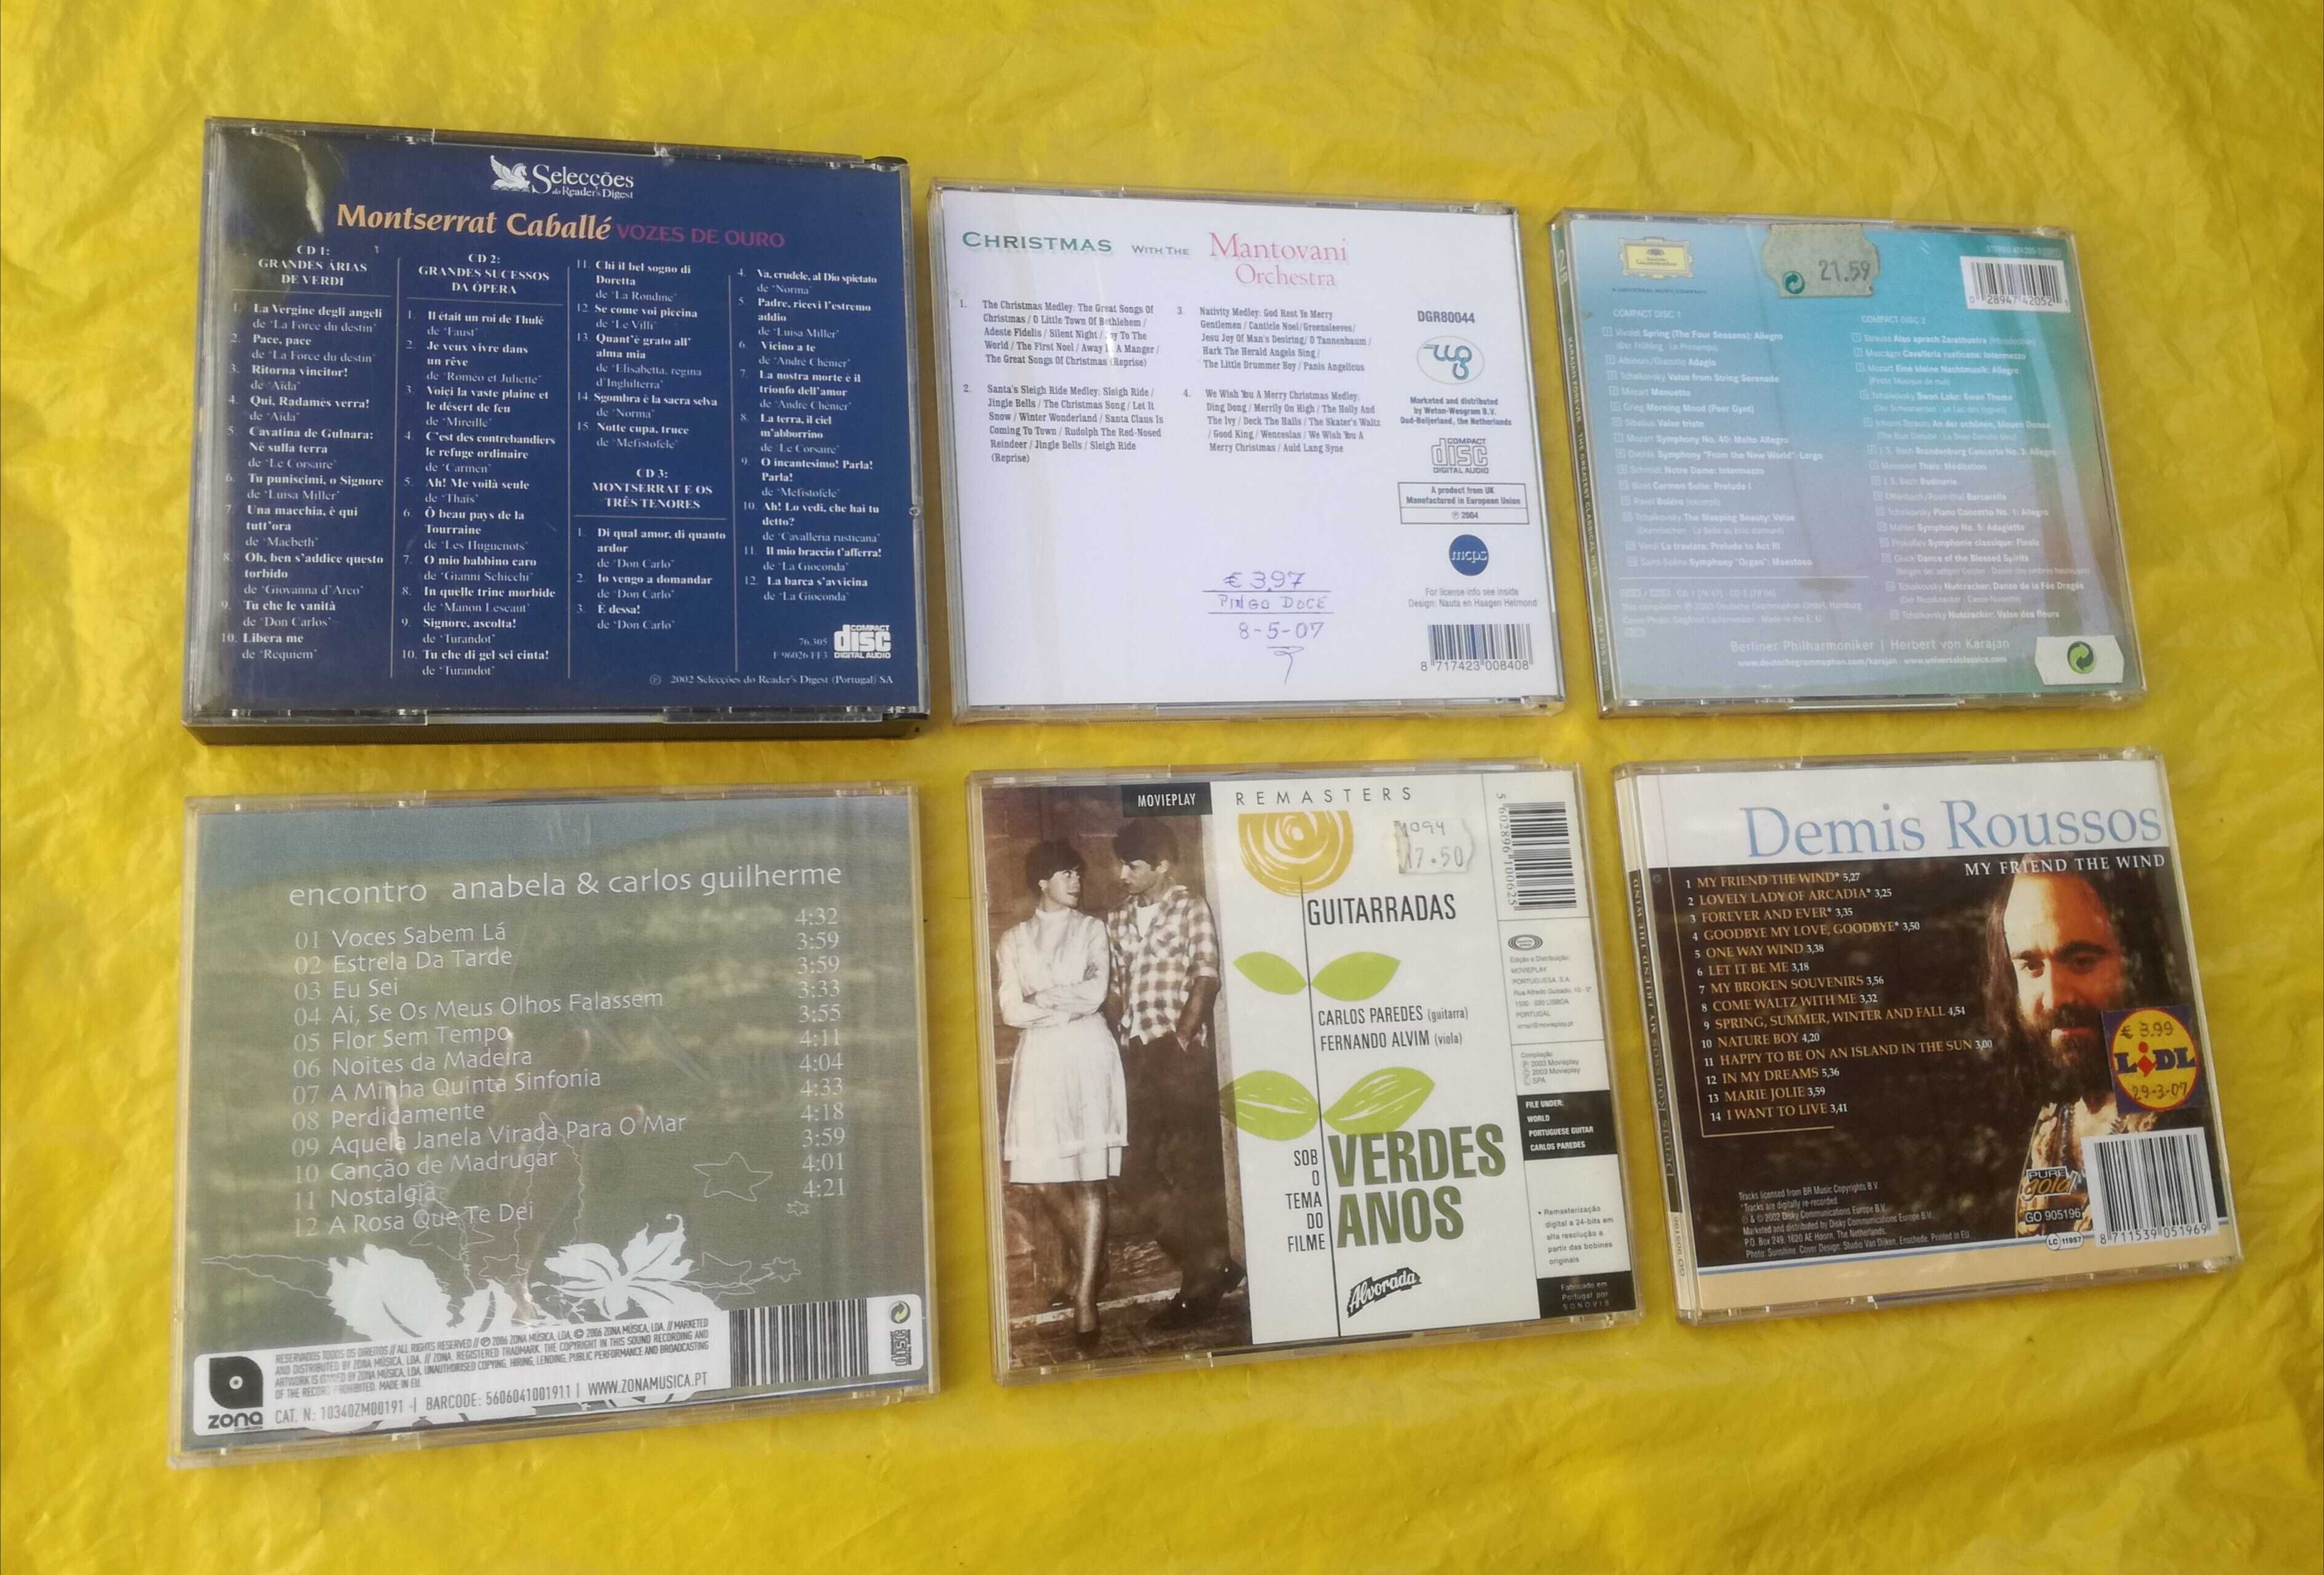 Lote (A) - 15 + 2 cd's